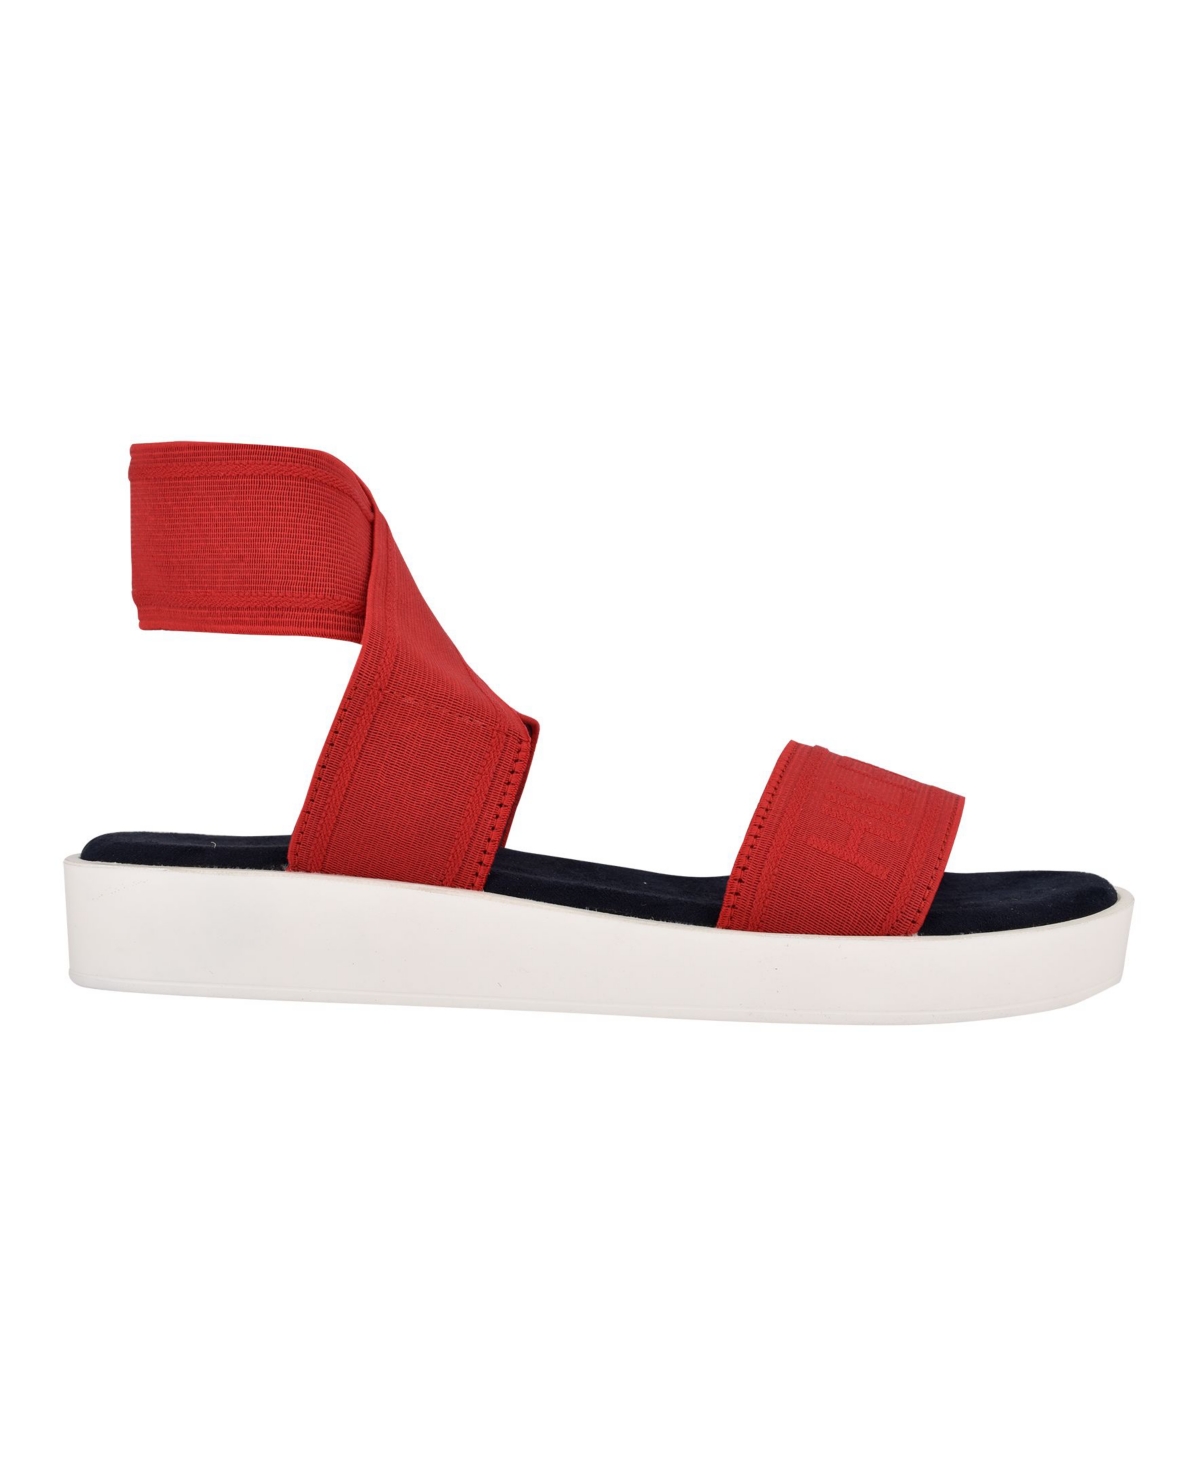 UPC 195182659464 product image for Tommy Hilfiger Women's Springi Stretch Ankle Wrap Sandals Women's Shoes | upcitemdb.com